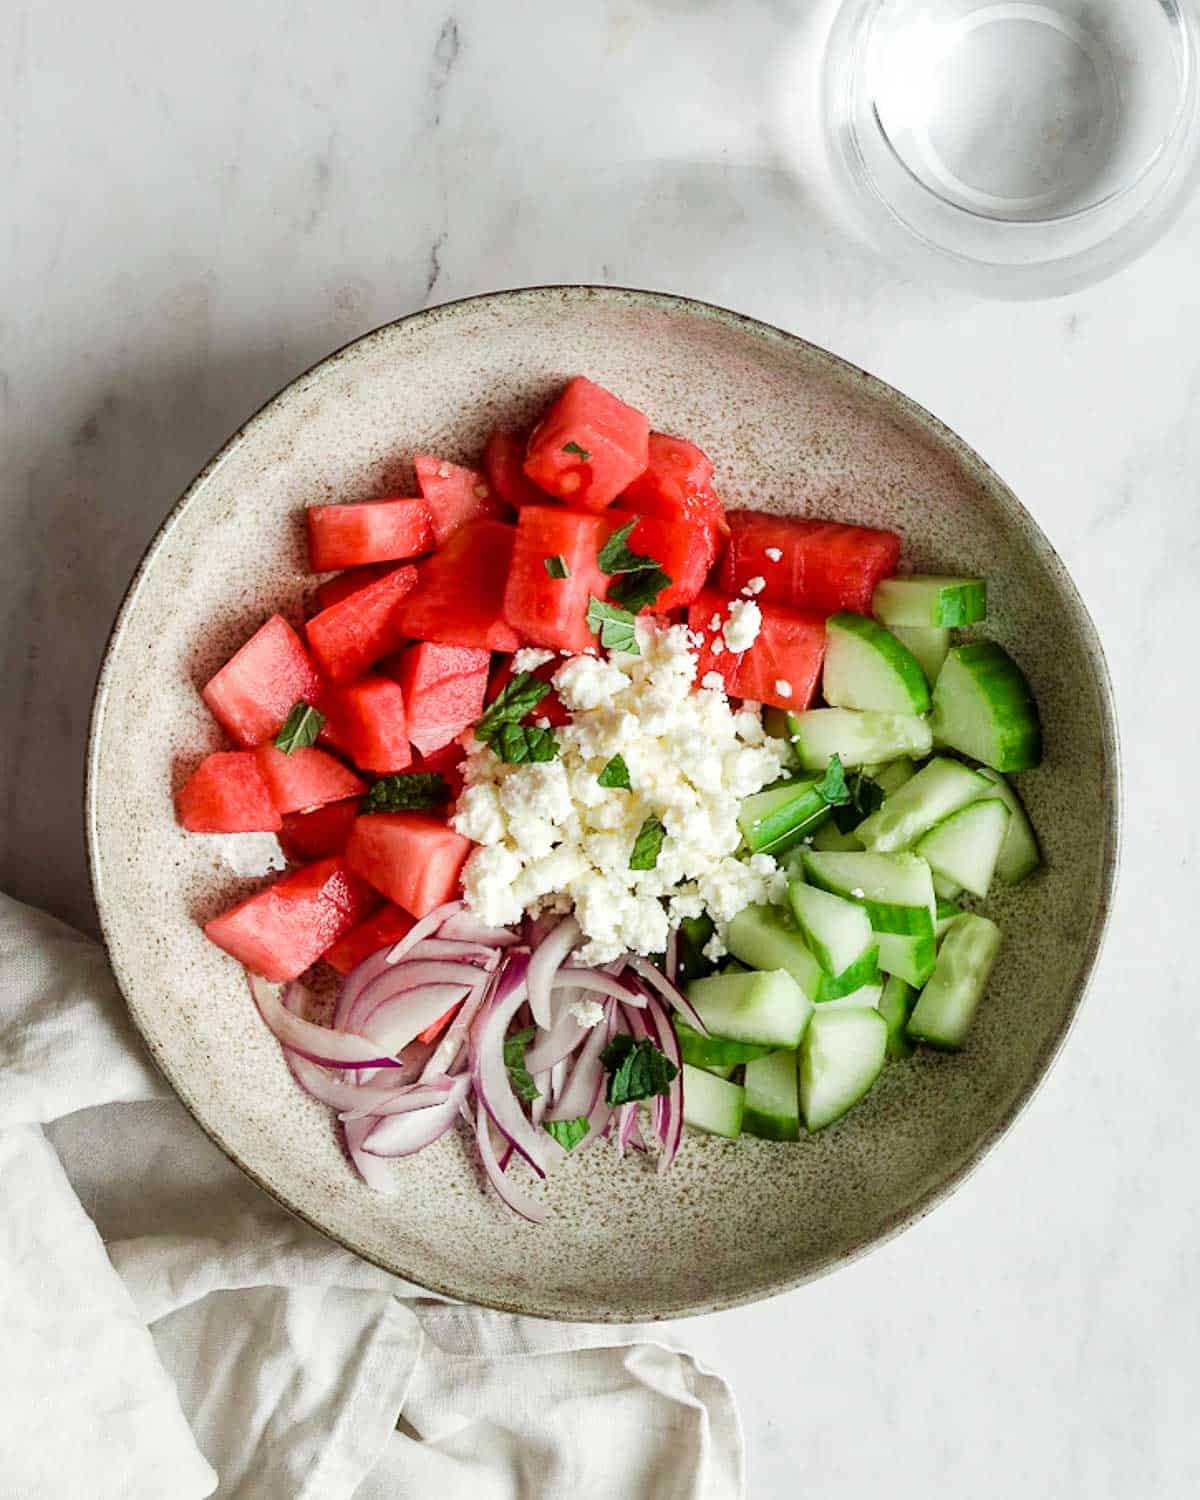 watermelon, feta, cucumber, red onion and mint leaves in a bowl.